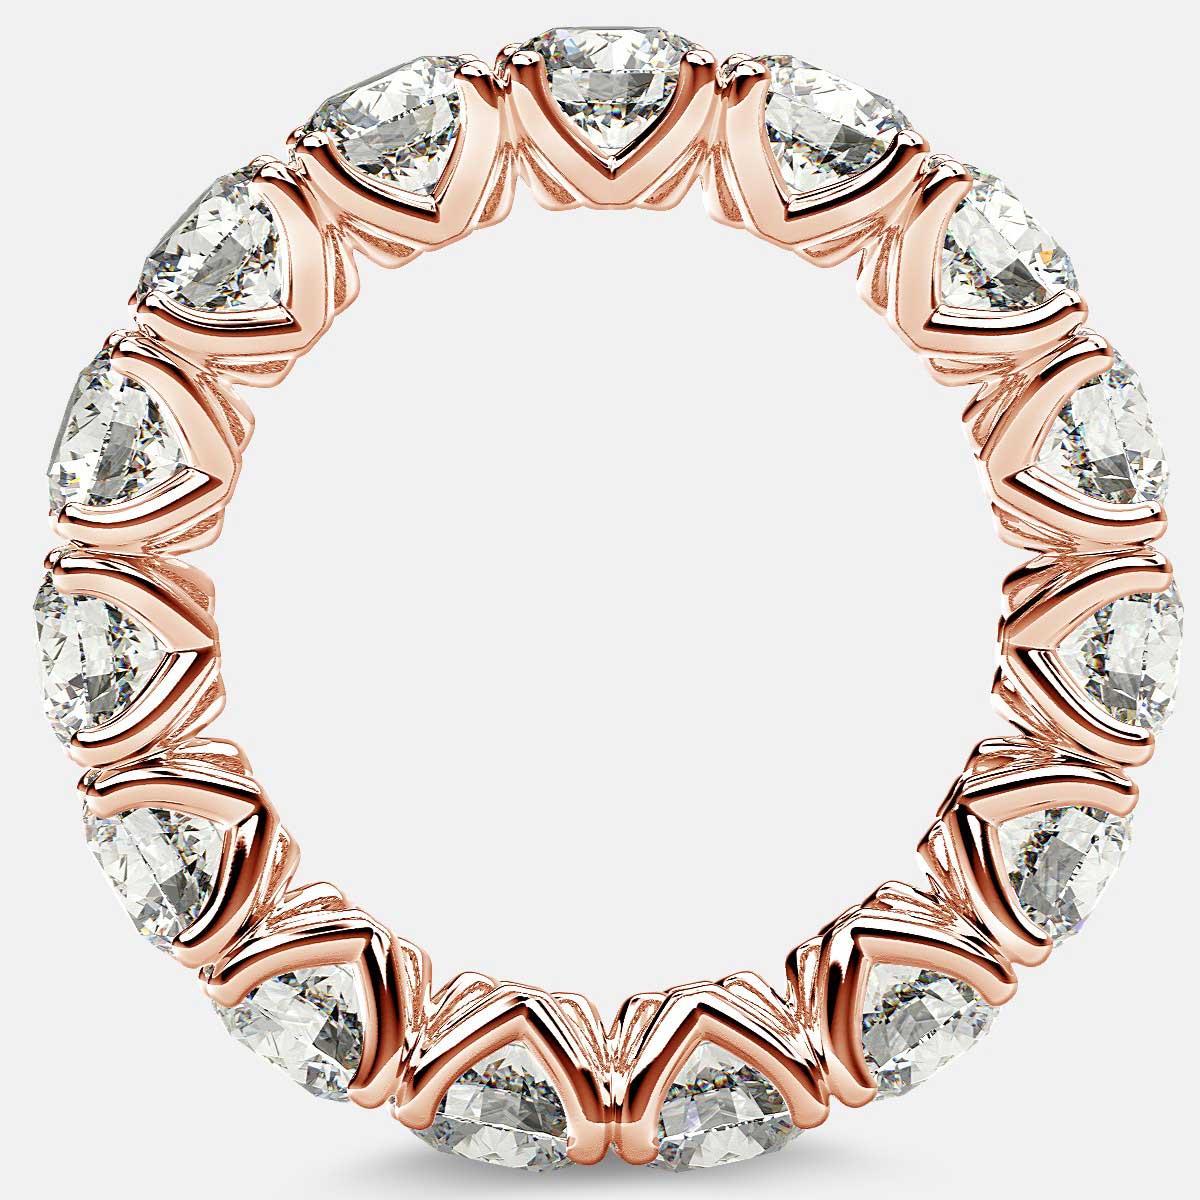 Curved V-Prong Eternity Ring with Round Diamonds in 18k Rose Gold